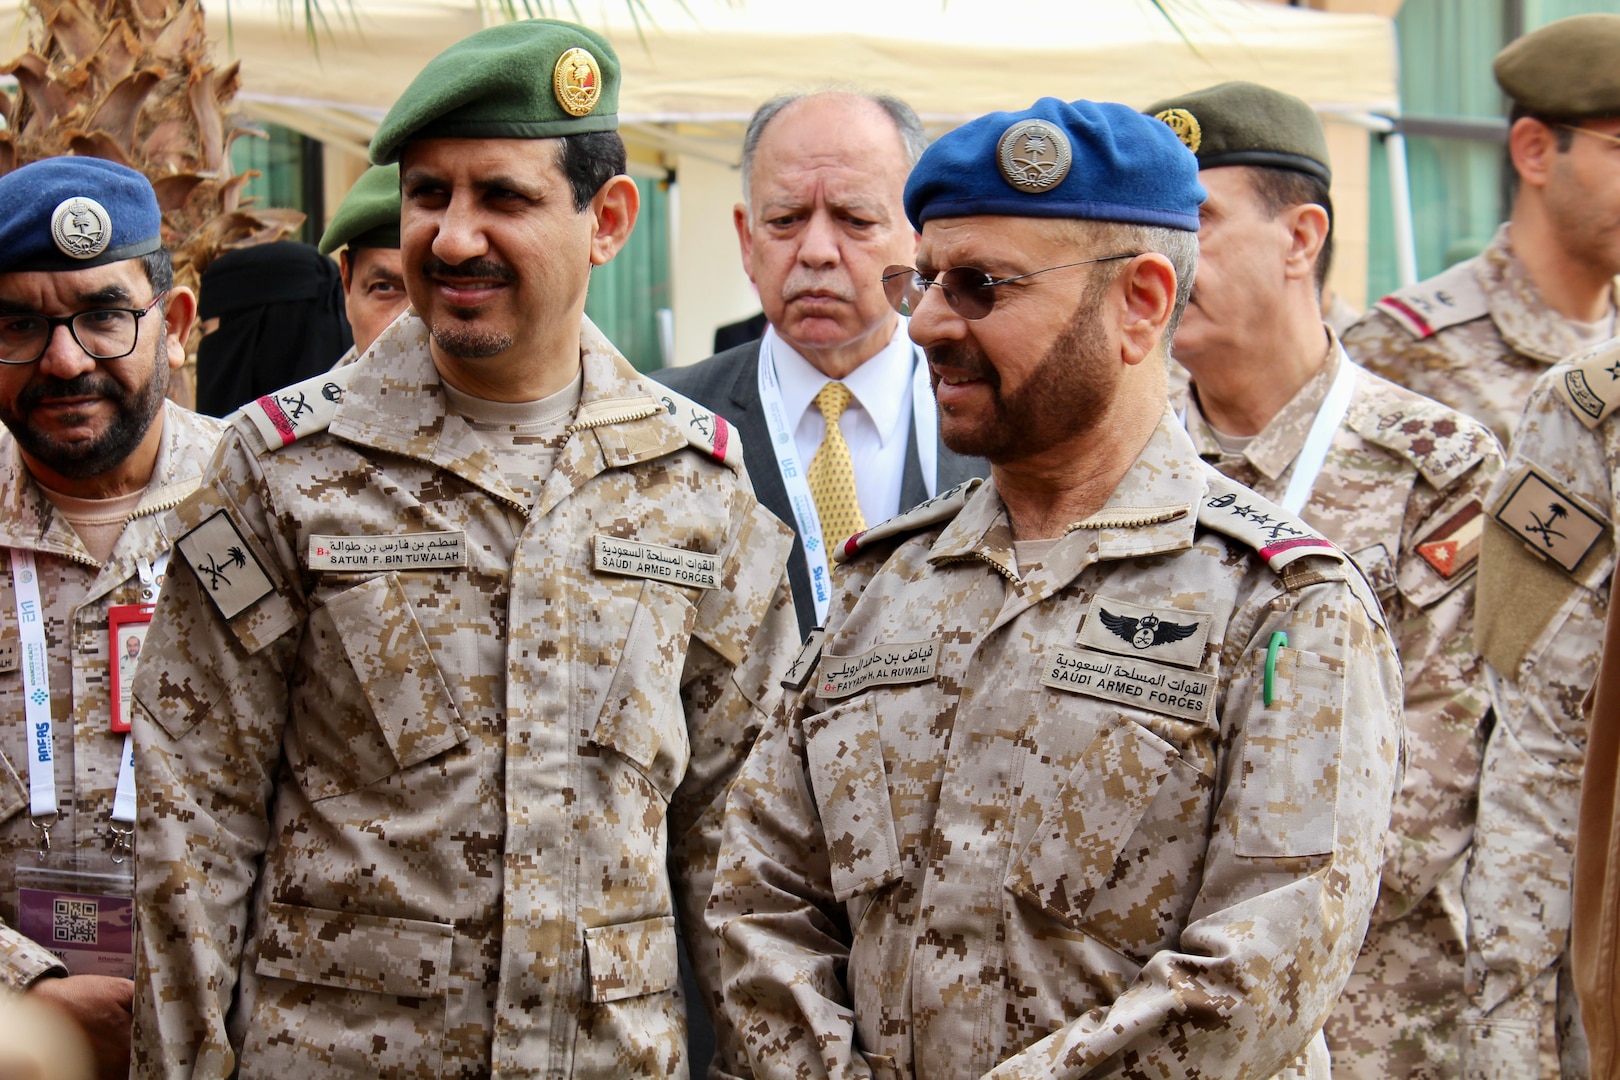 Chairman of the General Staff Air Chief Marshal Fayyadh Al Ruwaili, right, conducts walkthrough of medical training exercises at the first Multinational Medical Response Training in Riyadh, Saudi Arabia, Feb. 11-13, 2024. Opened to both military and civilian personnel of U.S. partner states in the U.S. Central Command’s area of responsibility, the biennial event will feature speakers, workshops,
exhibit displays, and a capstone field training exercise showcasing emergency medical readiness and response for disaster and humanitarian relief operations.